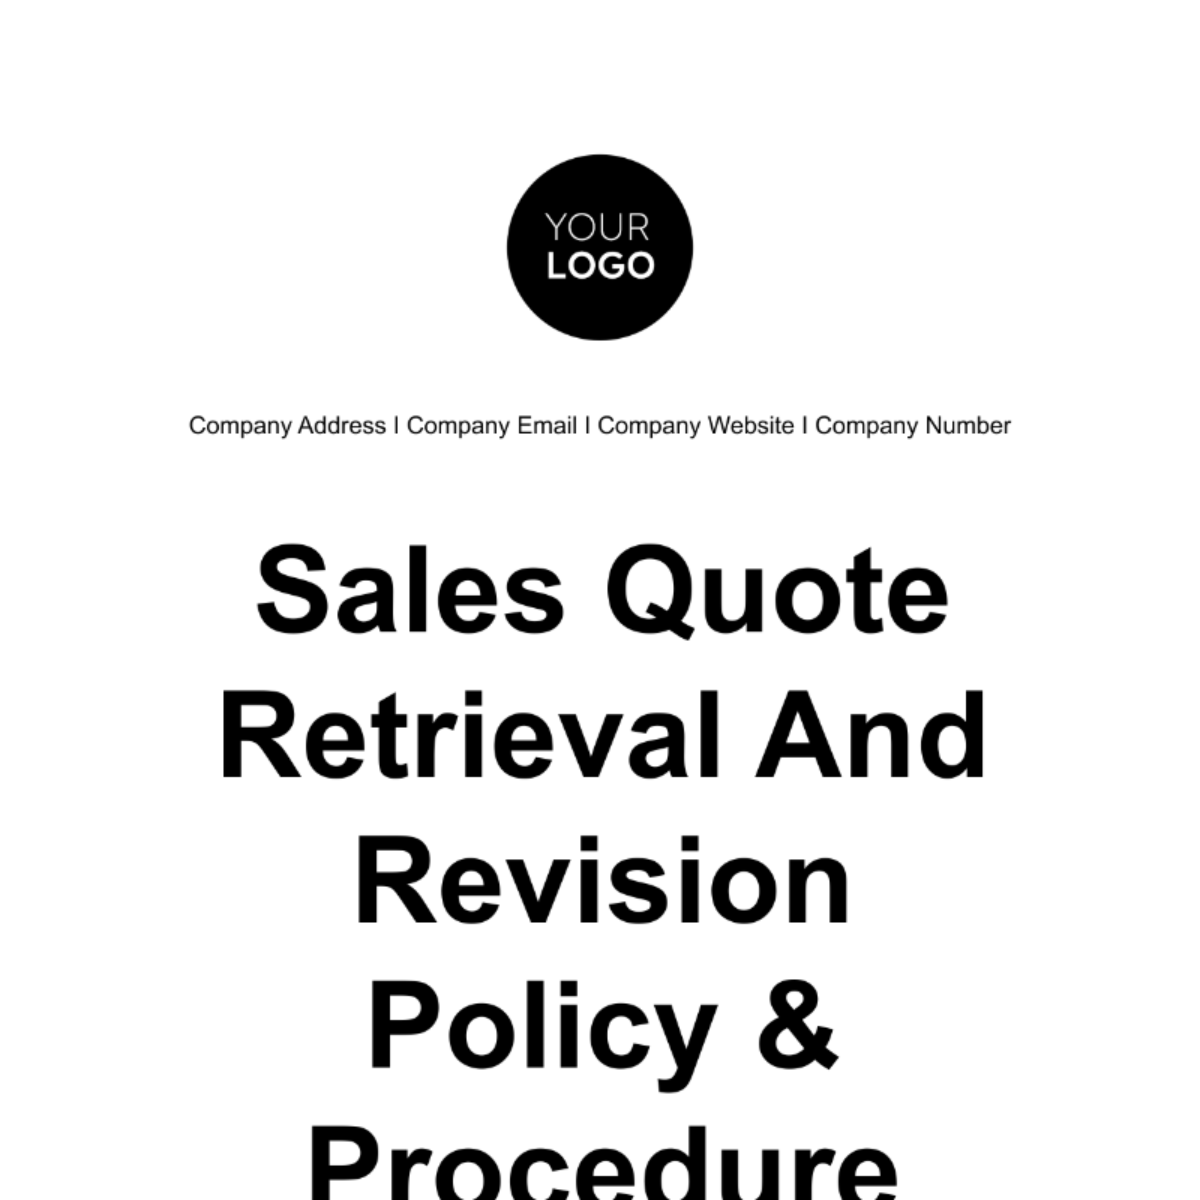 Sales Quote Retrieval and Revision Policy & Procedure Template